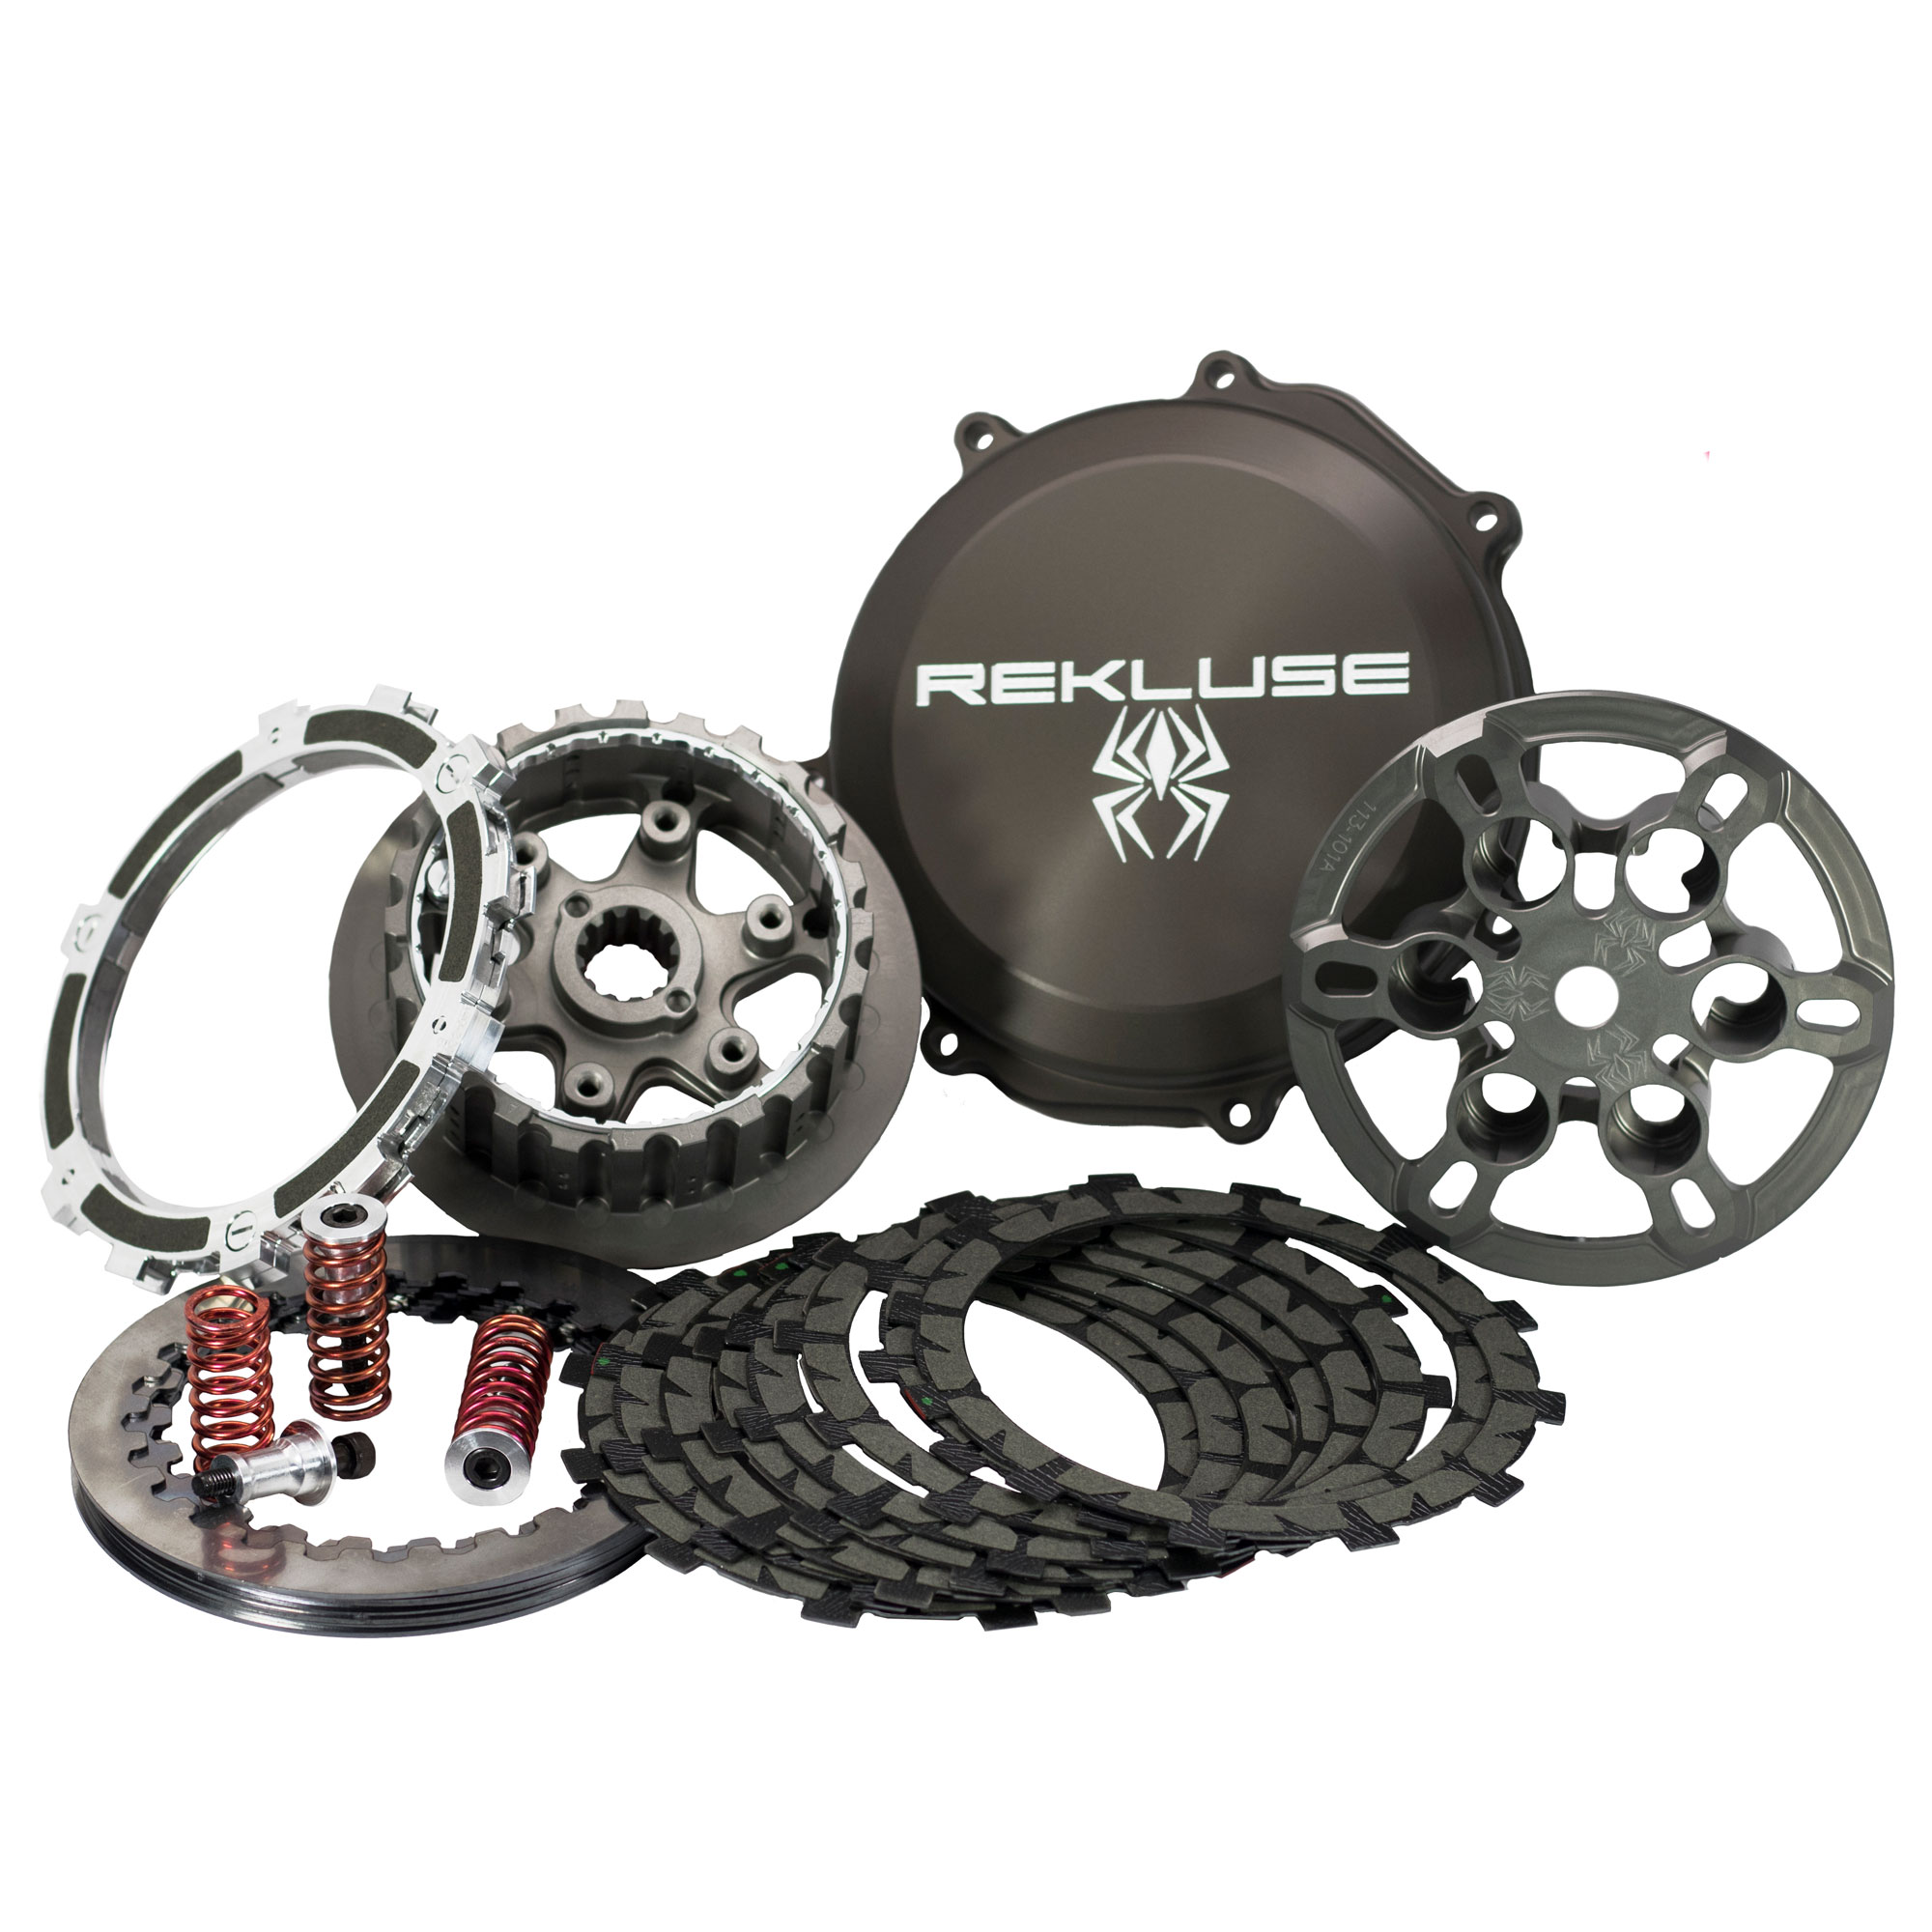 Rekluse Auto Clutch: Everything You Need to Know